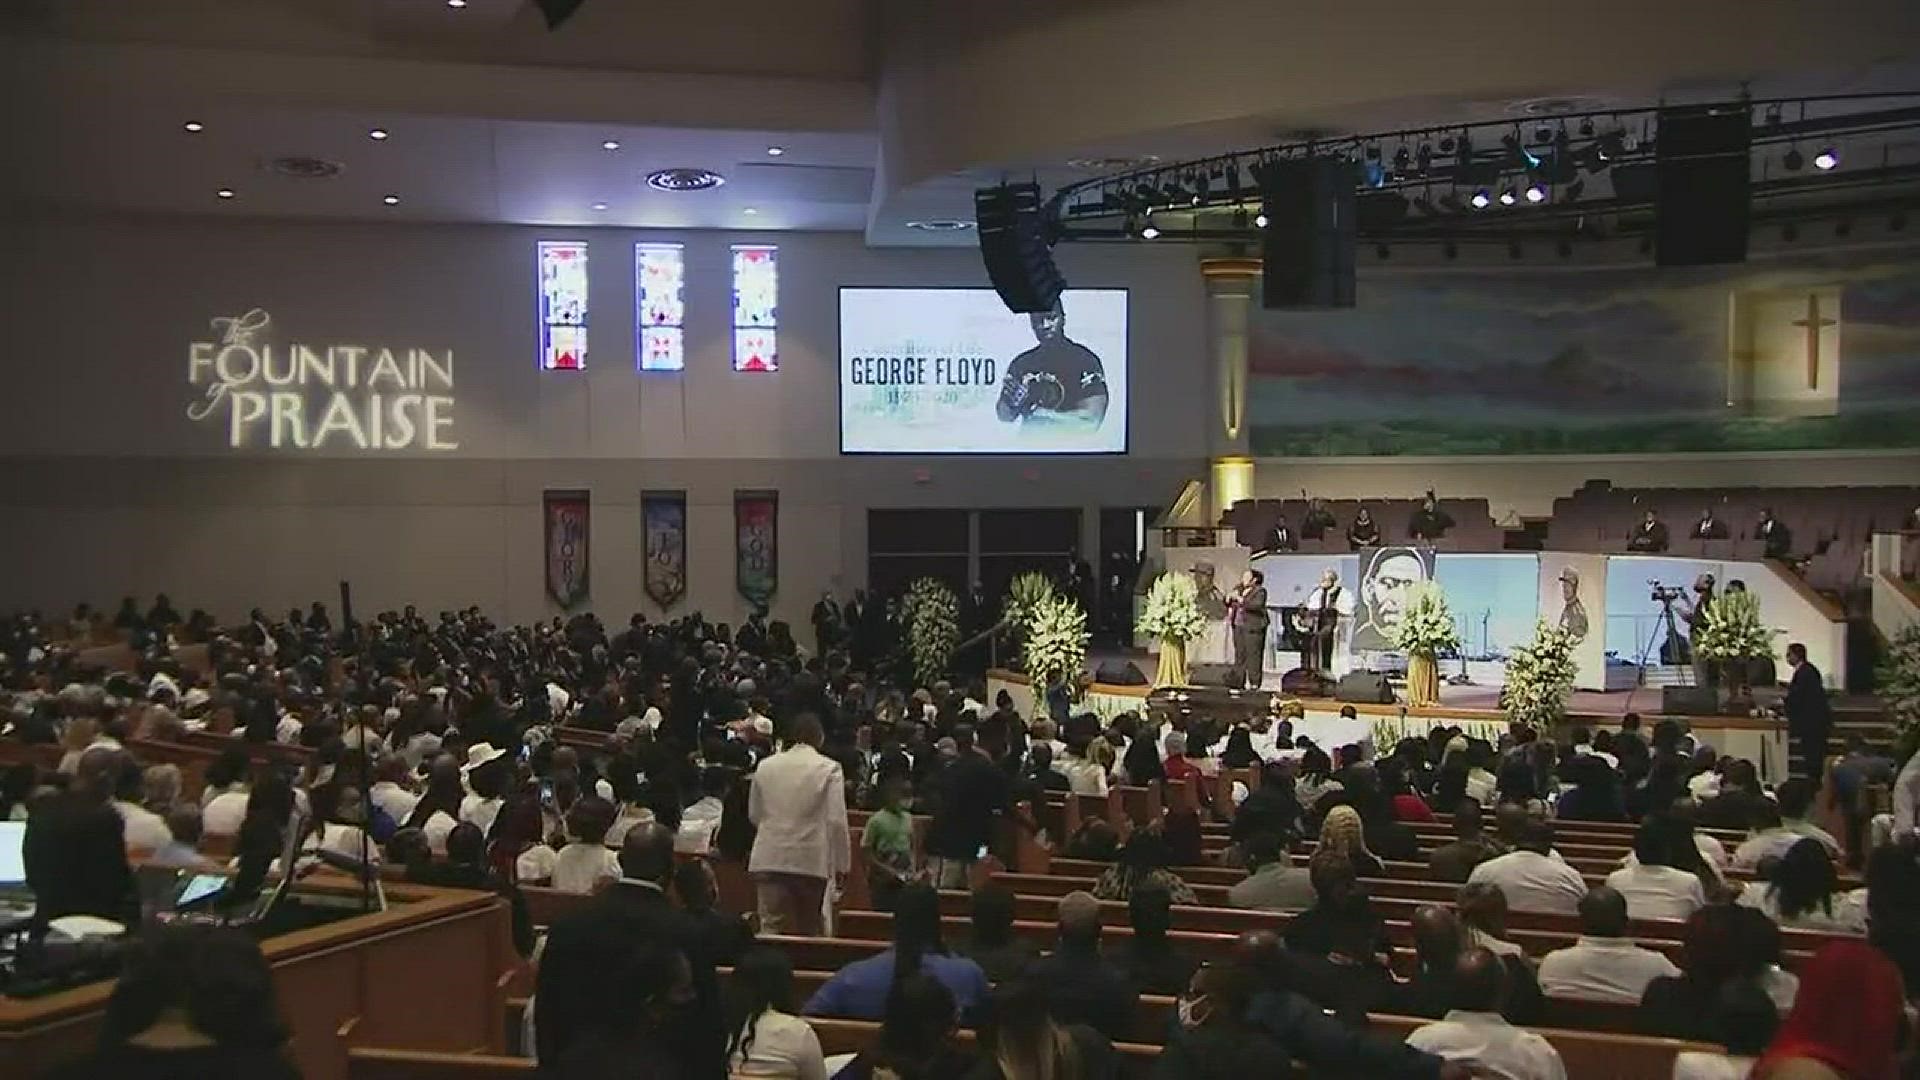 Rev. Al Sharpton delivered the eulogy at the funeral for George Floyd in Houston, Texas on June 9, 2020.